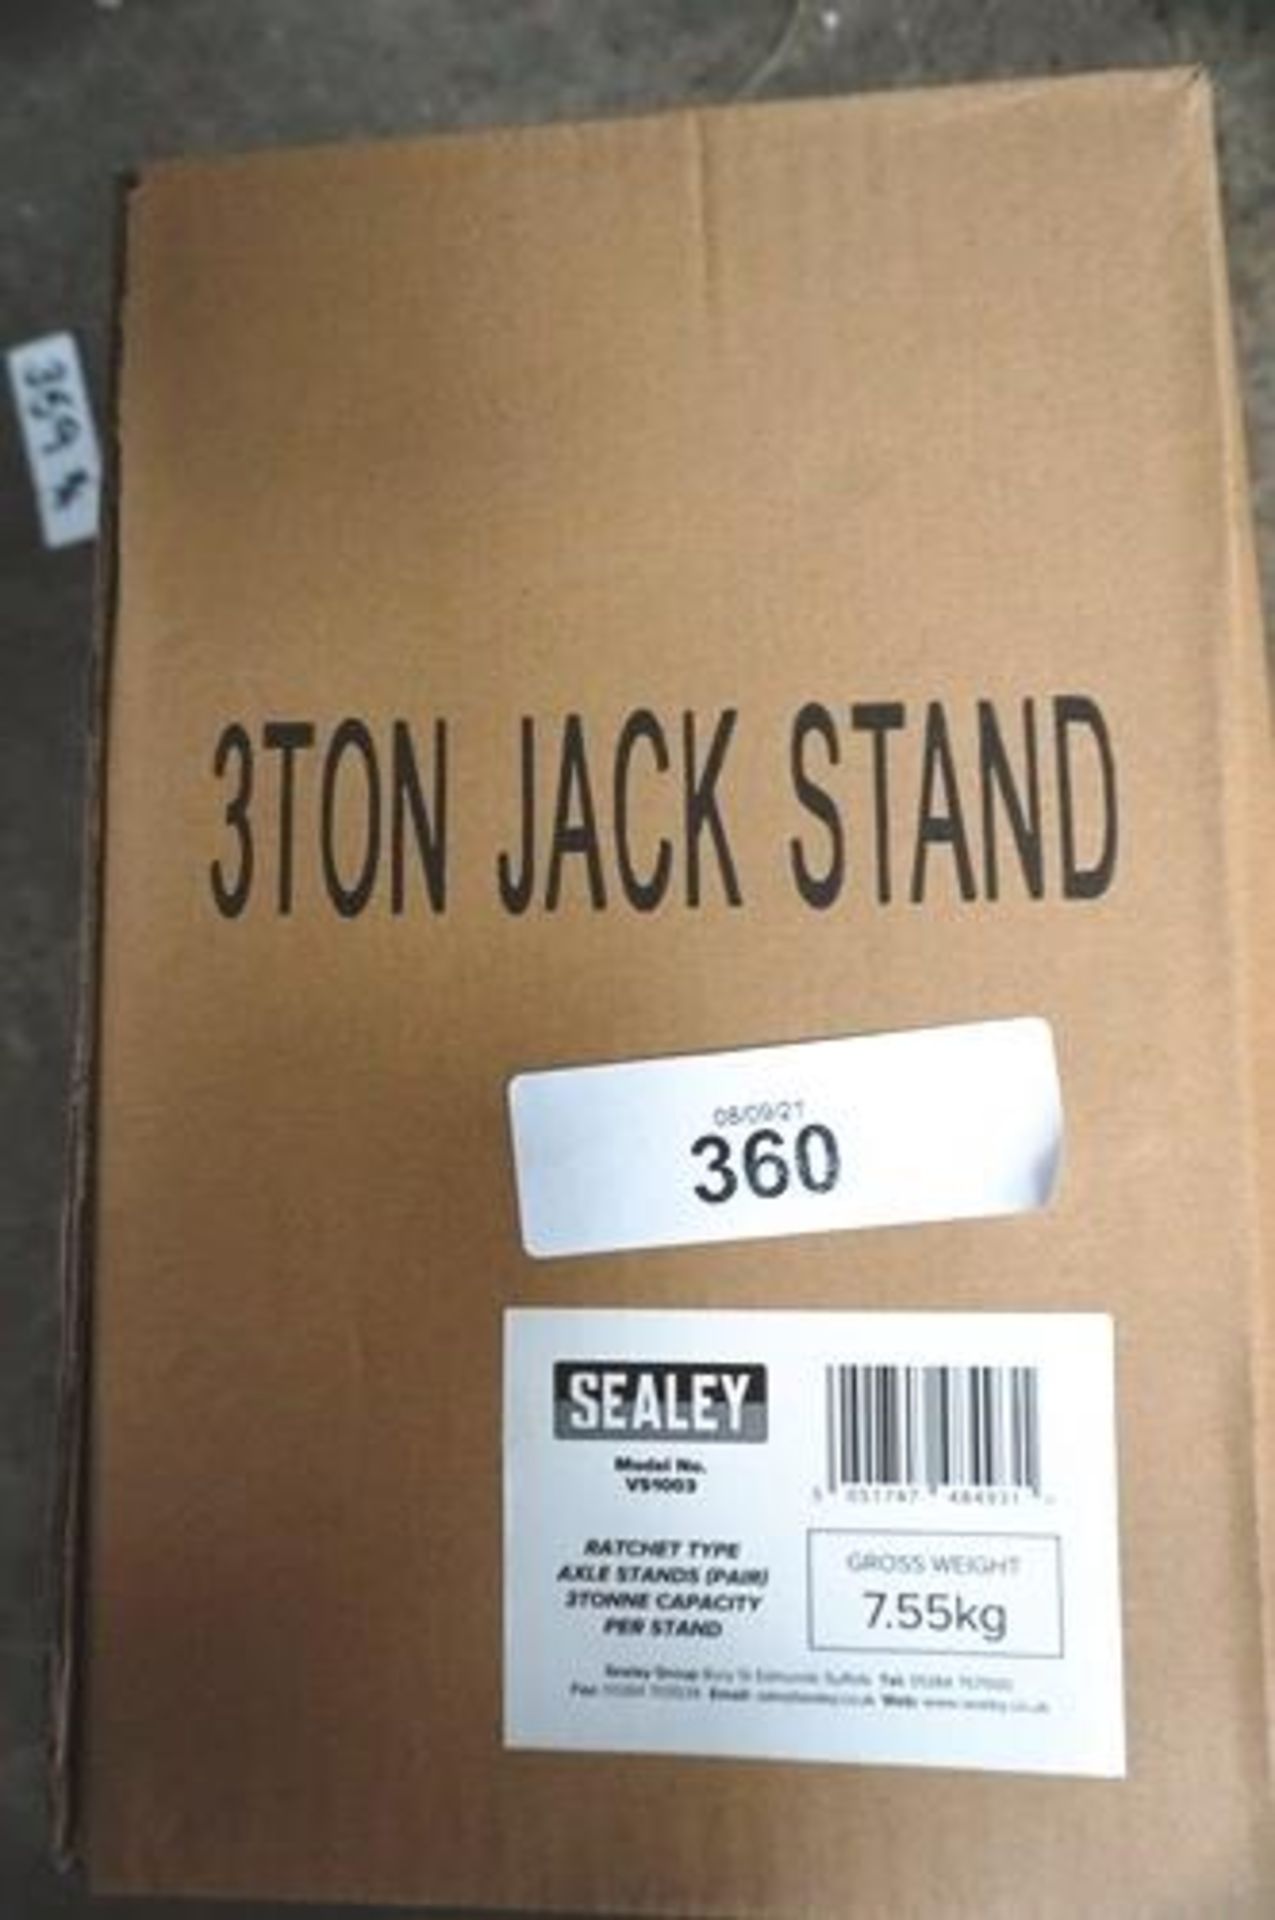 1 x Sealey trolley jack, 3 tonne standard chassis, model 3010CX.V2 - New, unboxed (GS6) - Image 2 of 2